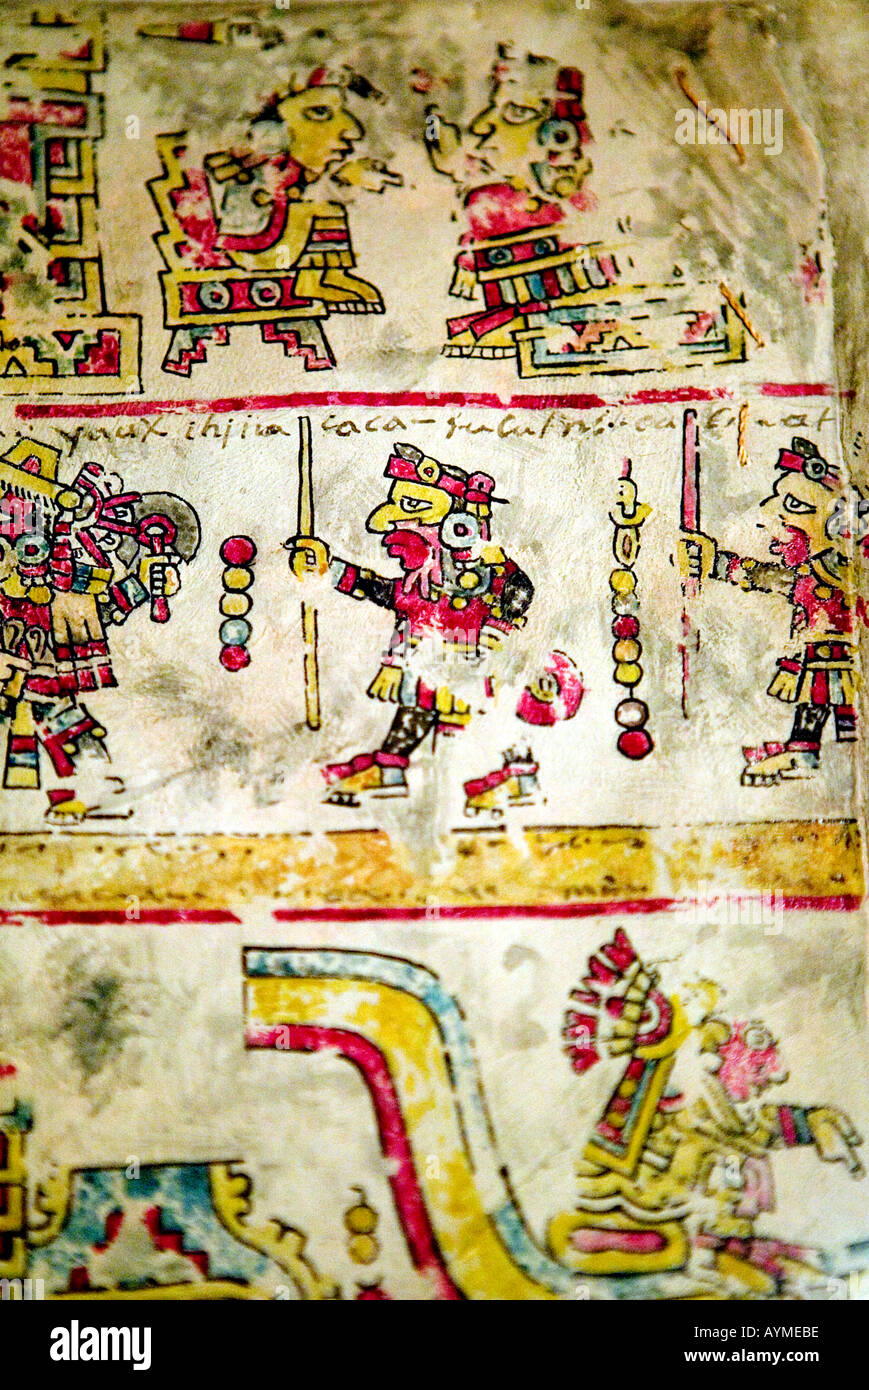 Ancient codices in the National Anthropology Museum in Chapultepec Mexico City Stock Photo